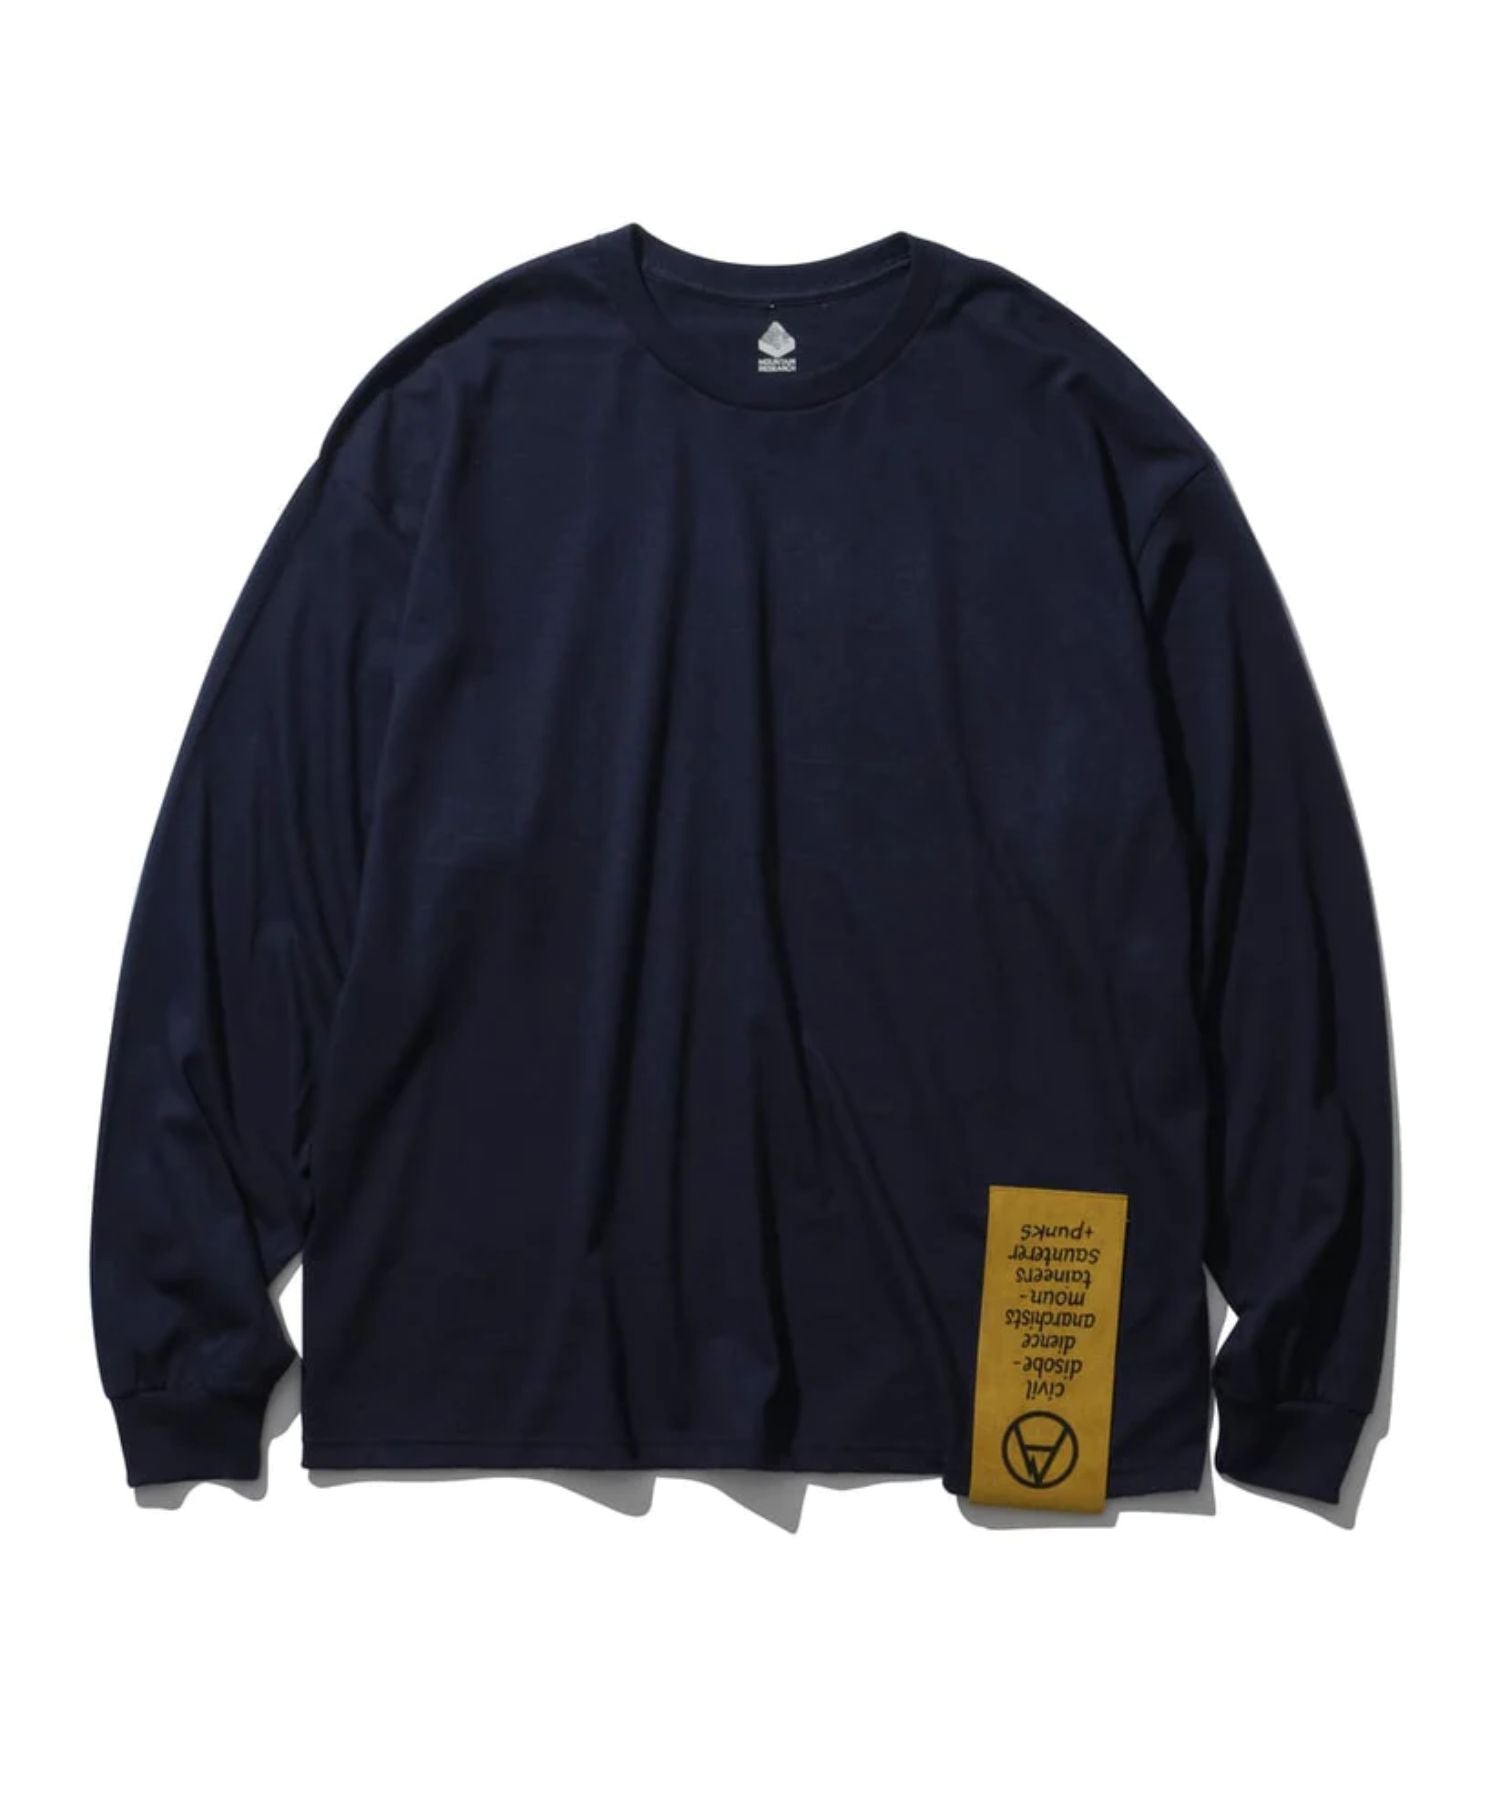 Mega Tag L/S - MOUNTAIN RESEARCH (マウンテンリサーチ) - tops